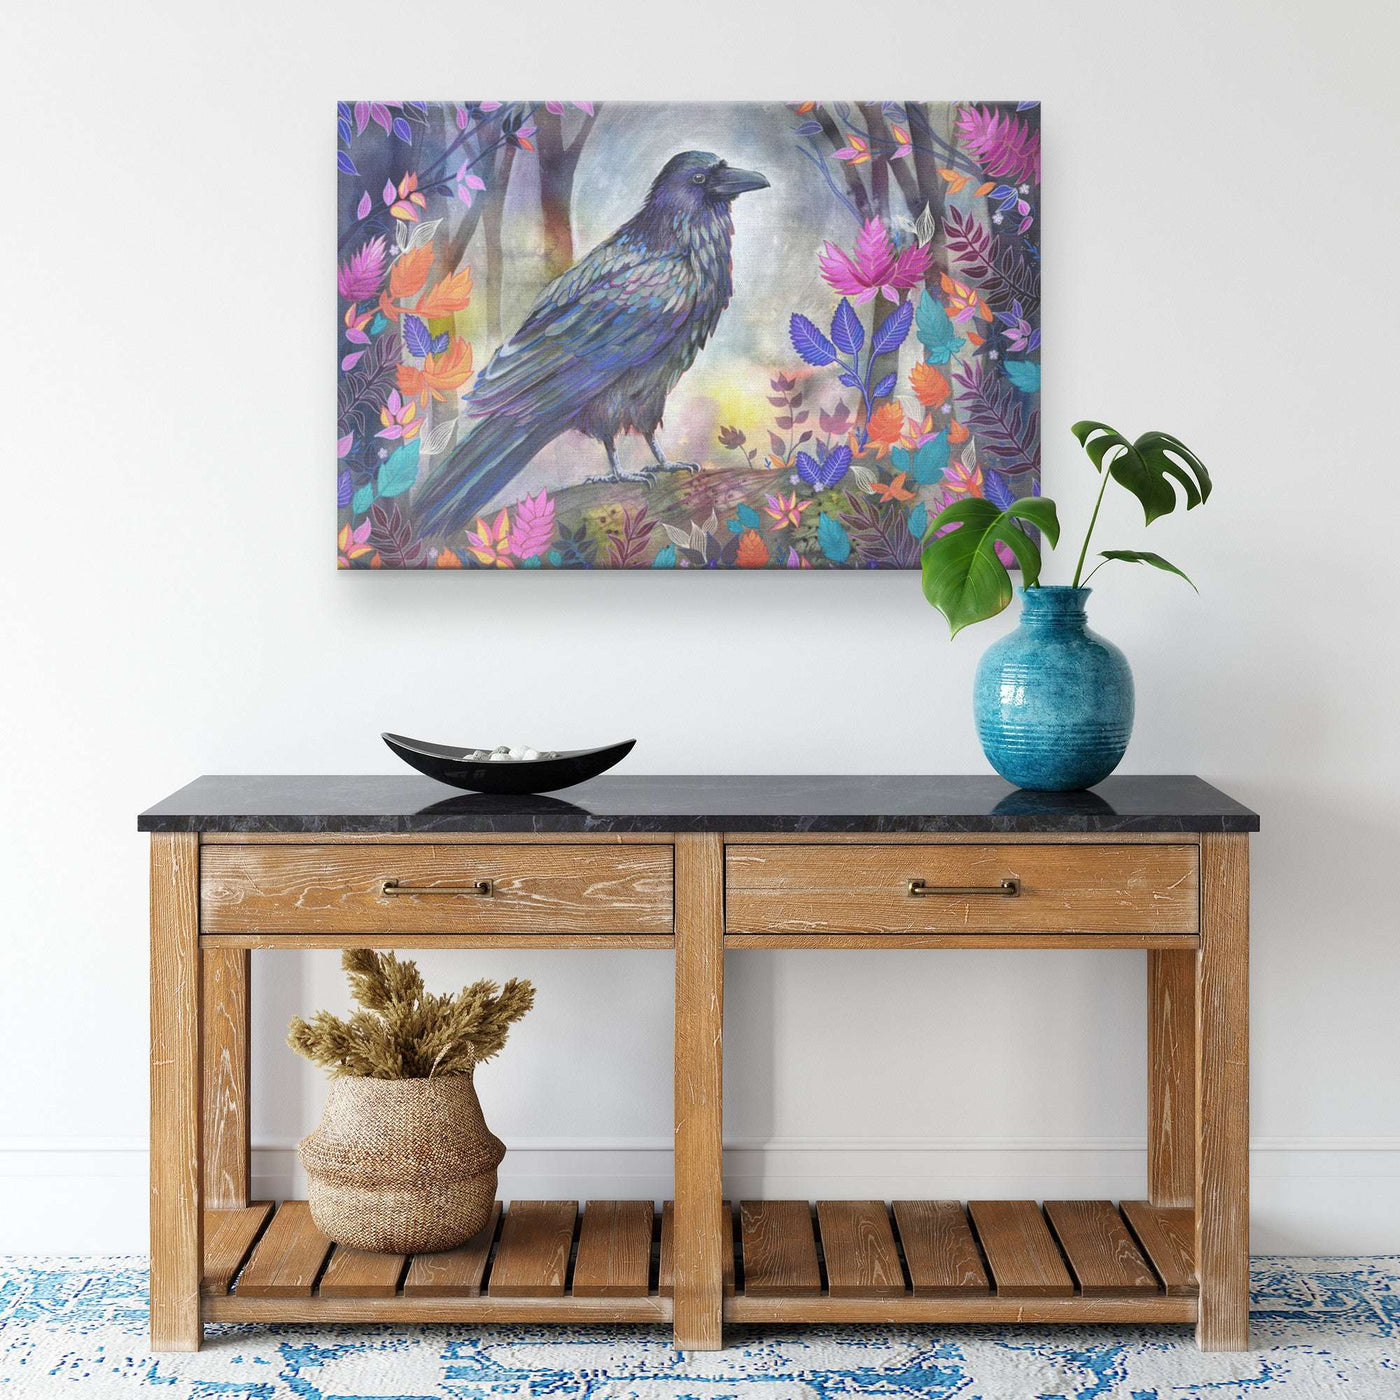 A colorful Canvas Raven Art Print of a raven among vibrant flowers hangs above a wooden table.